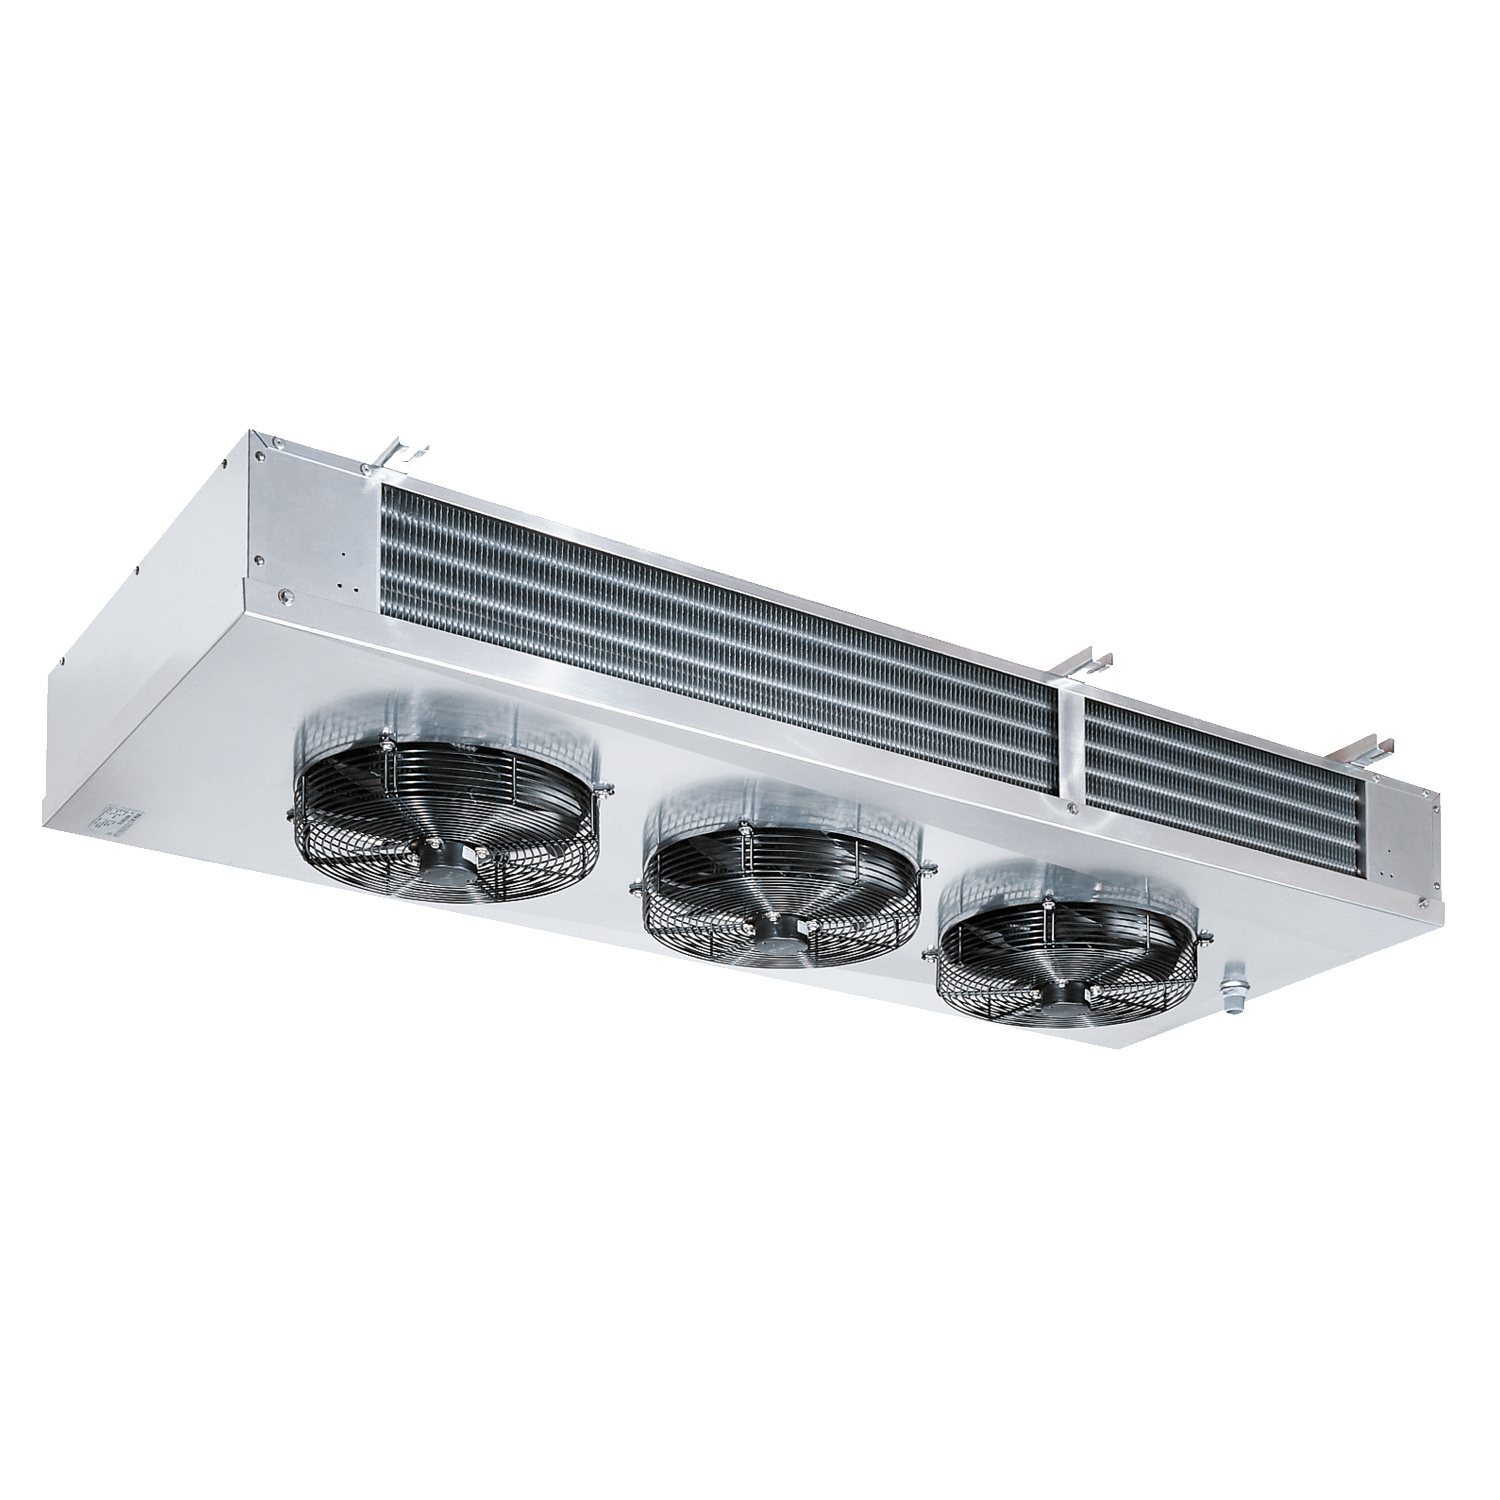 RDFX-350: Ceiling evaporator with double-sided air outlet